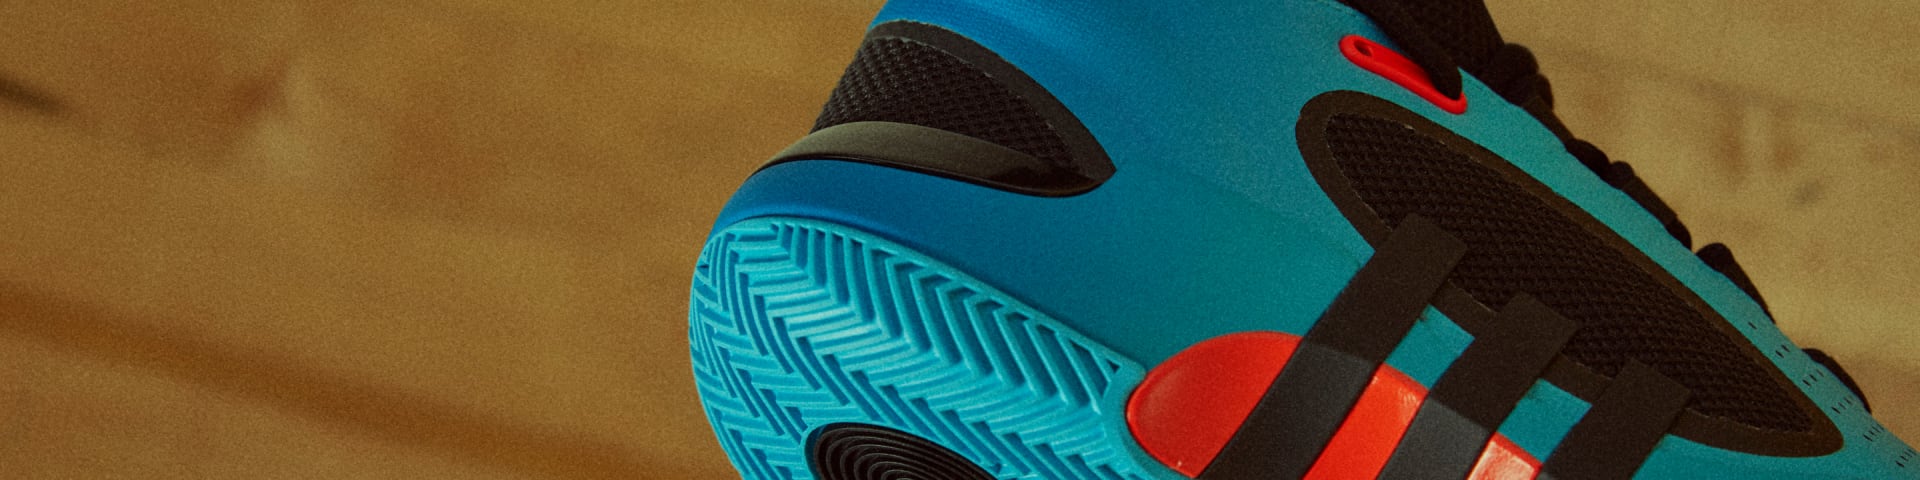 Close-up shoe of blue, black and orange basketball shoe heel and sole, with adidas three-stripes